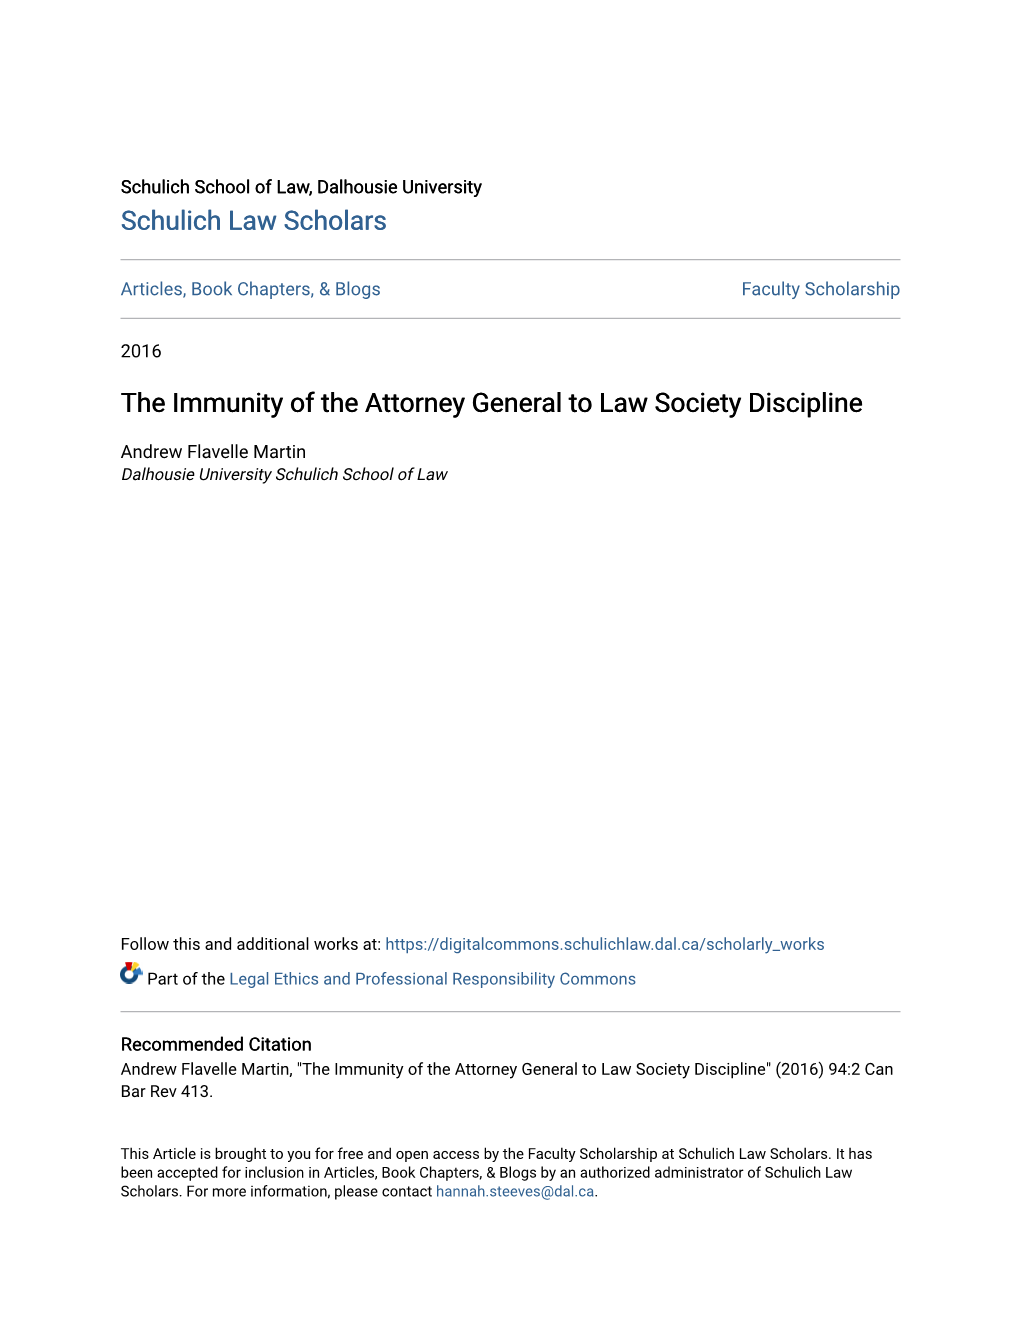 The Immunity of the Attorney General to Law Society Discipline